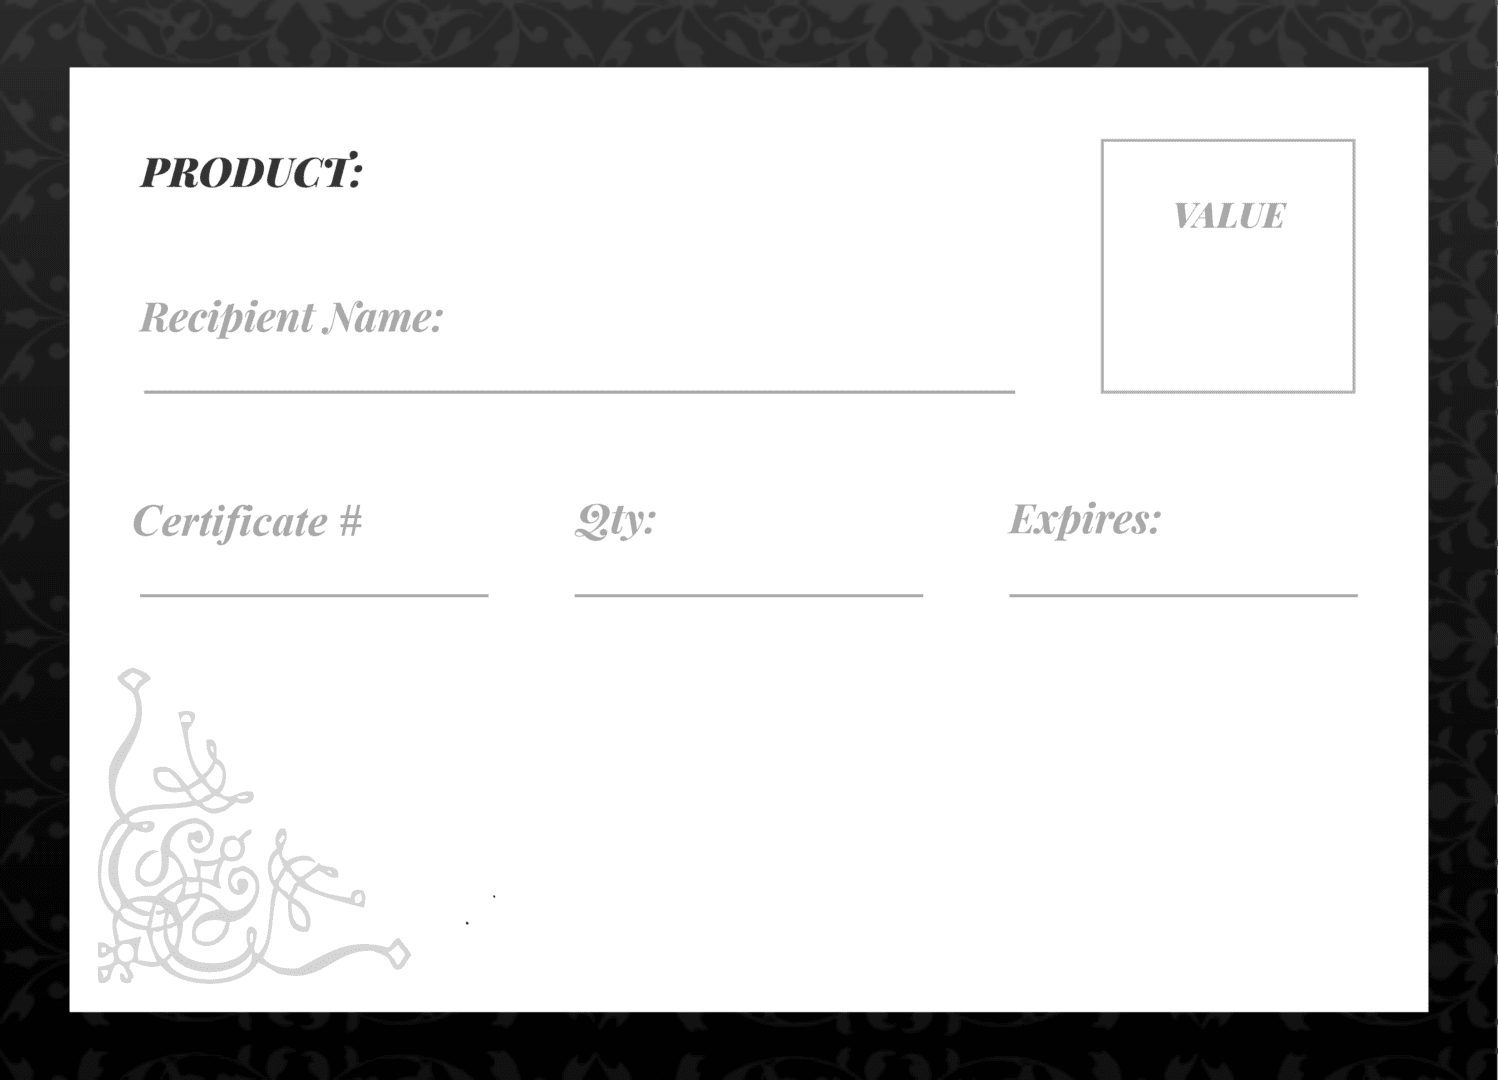 A gift certificate with a picture of a flower.